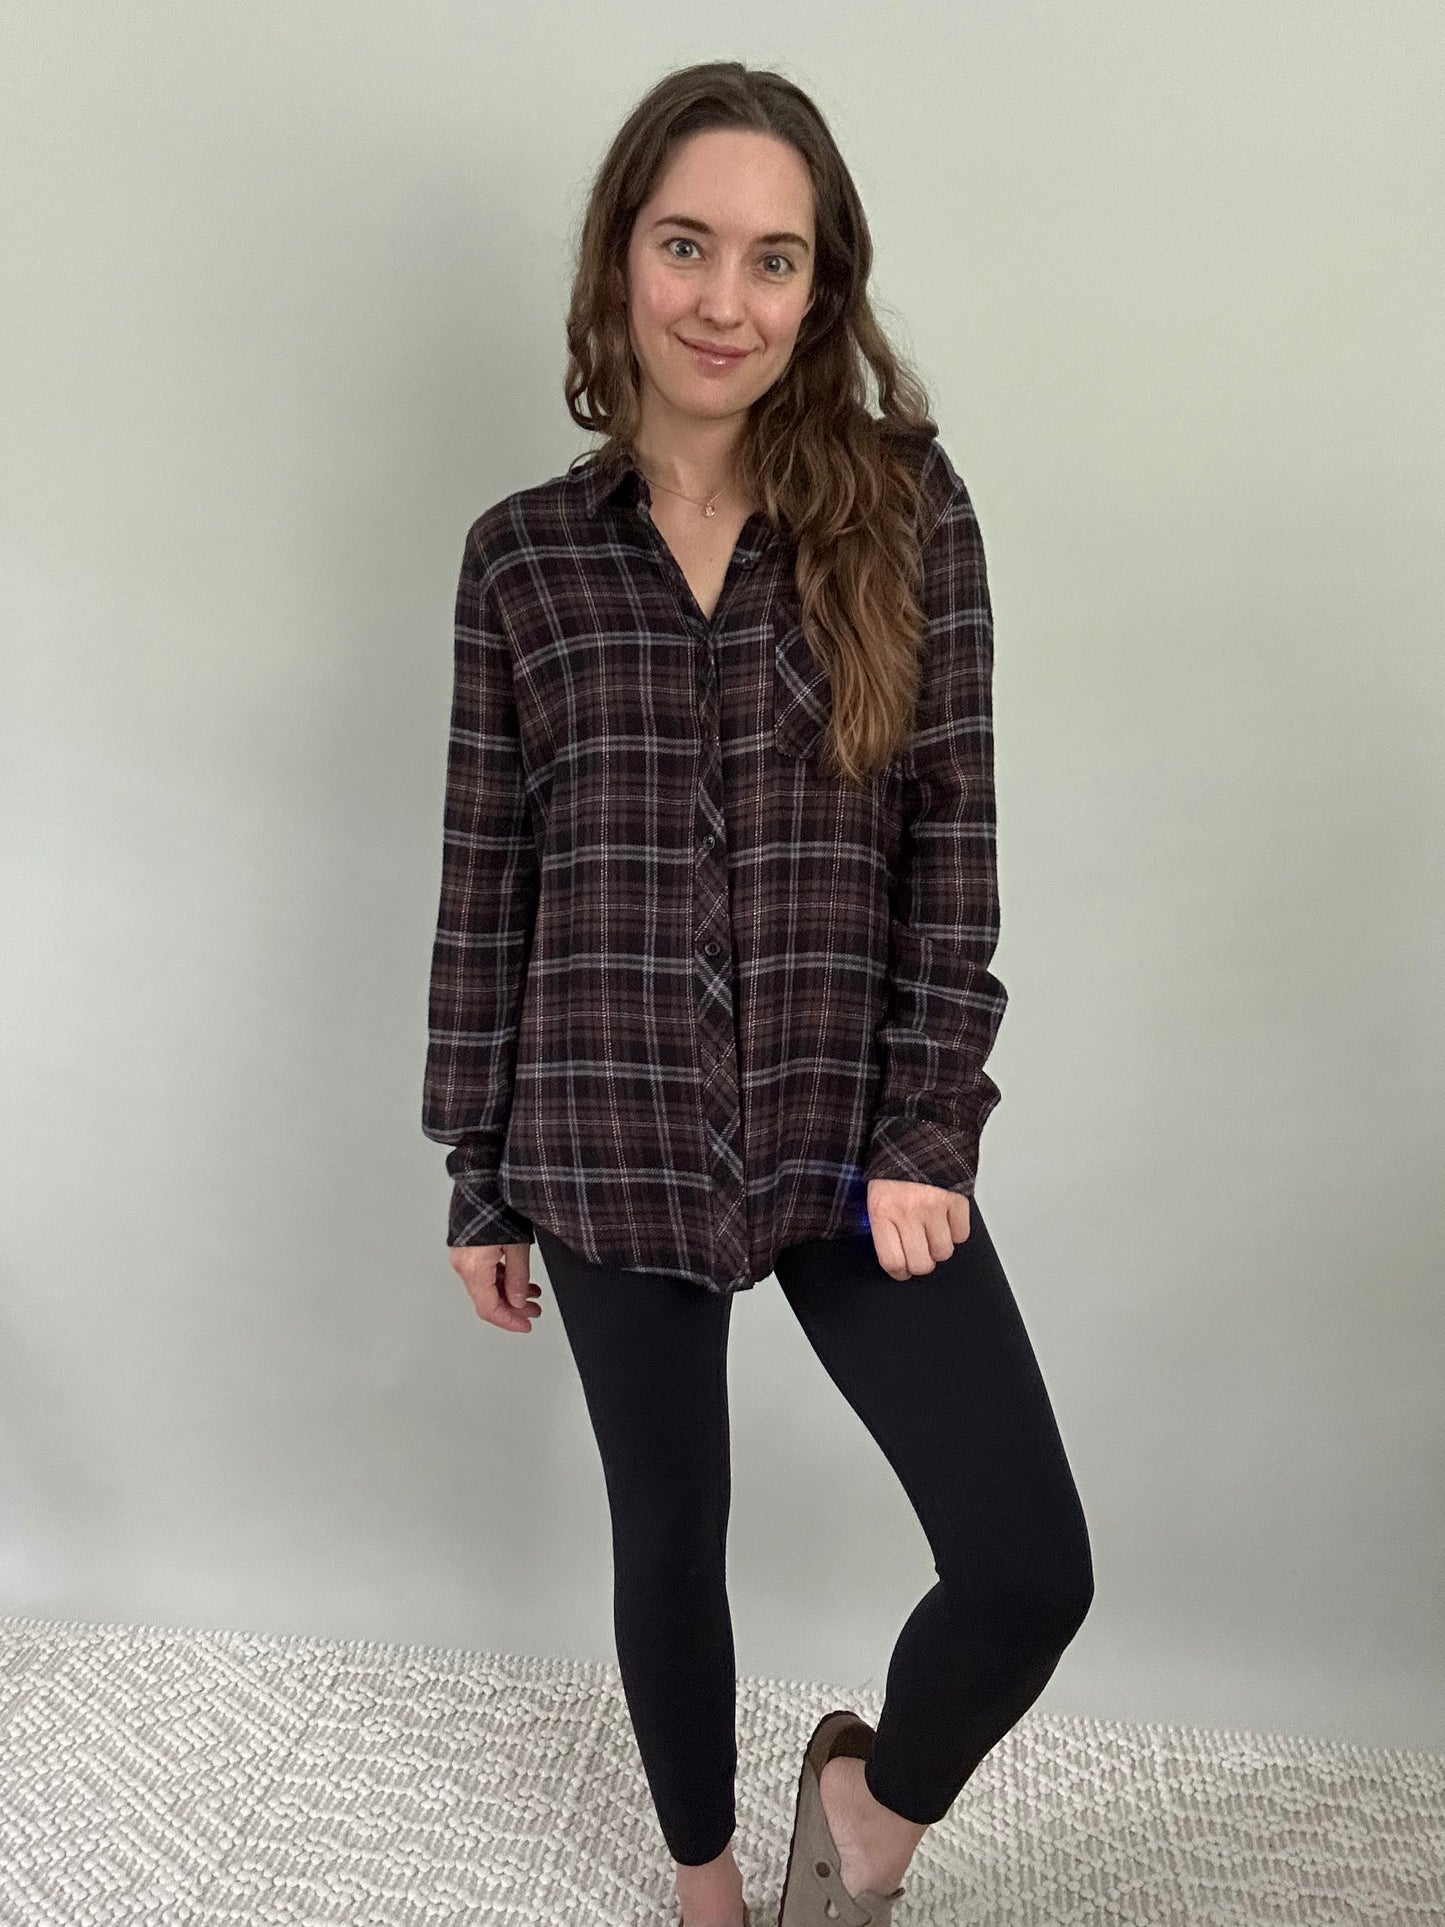 The Rowan Flannel. Black and brown soft flannel.